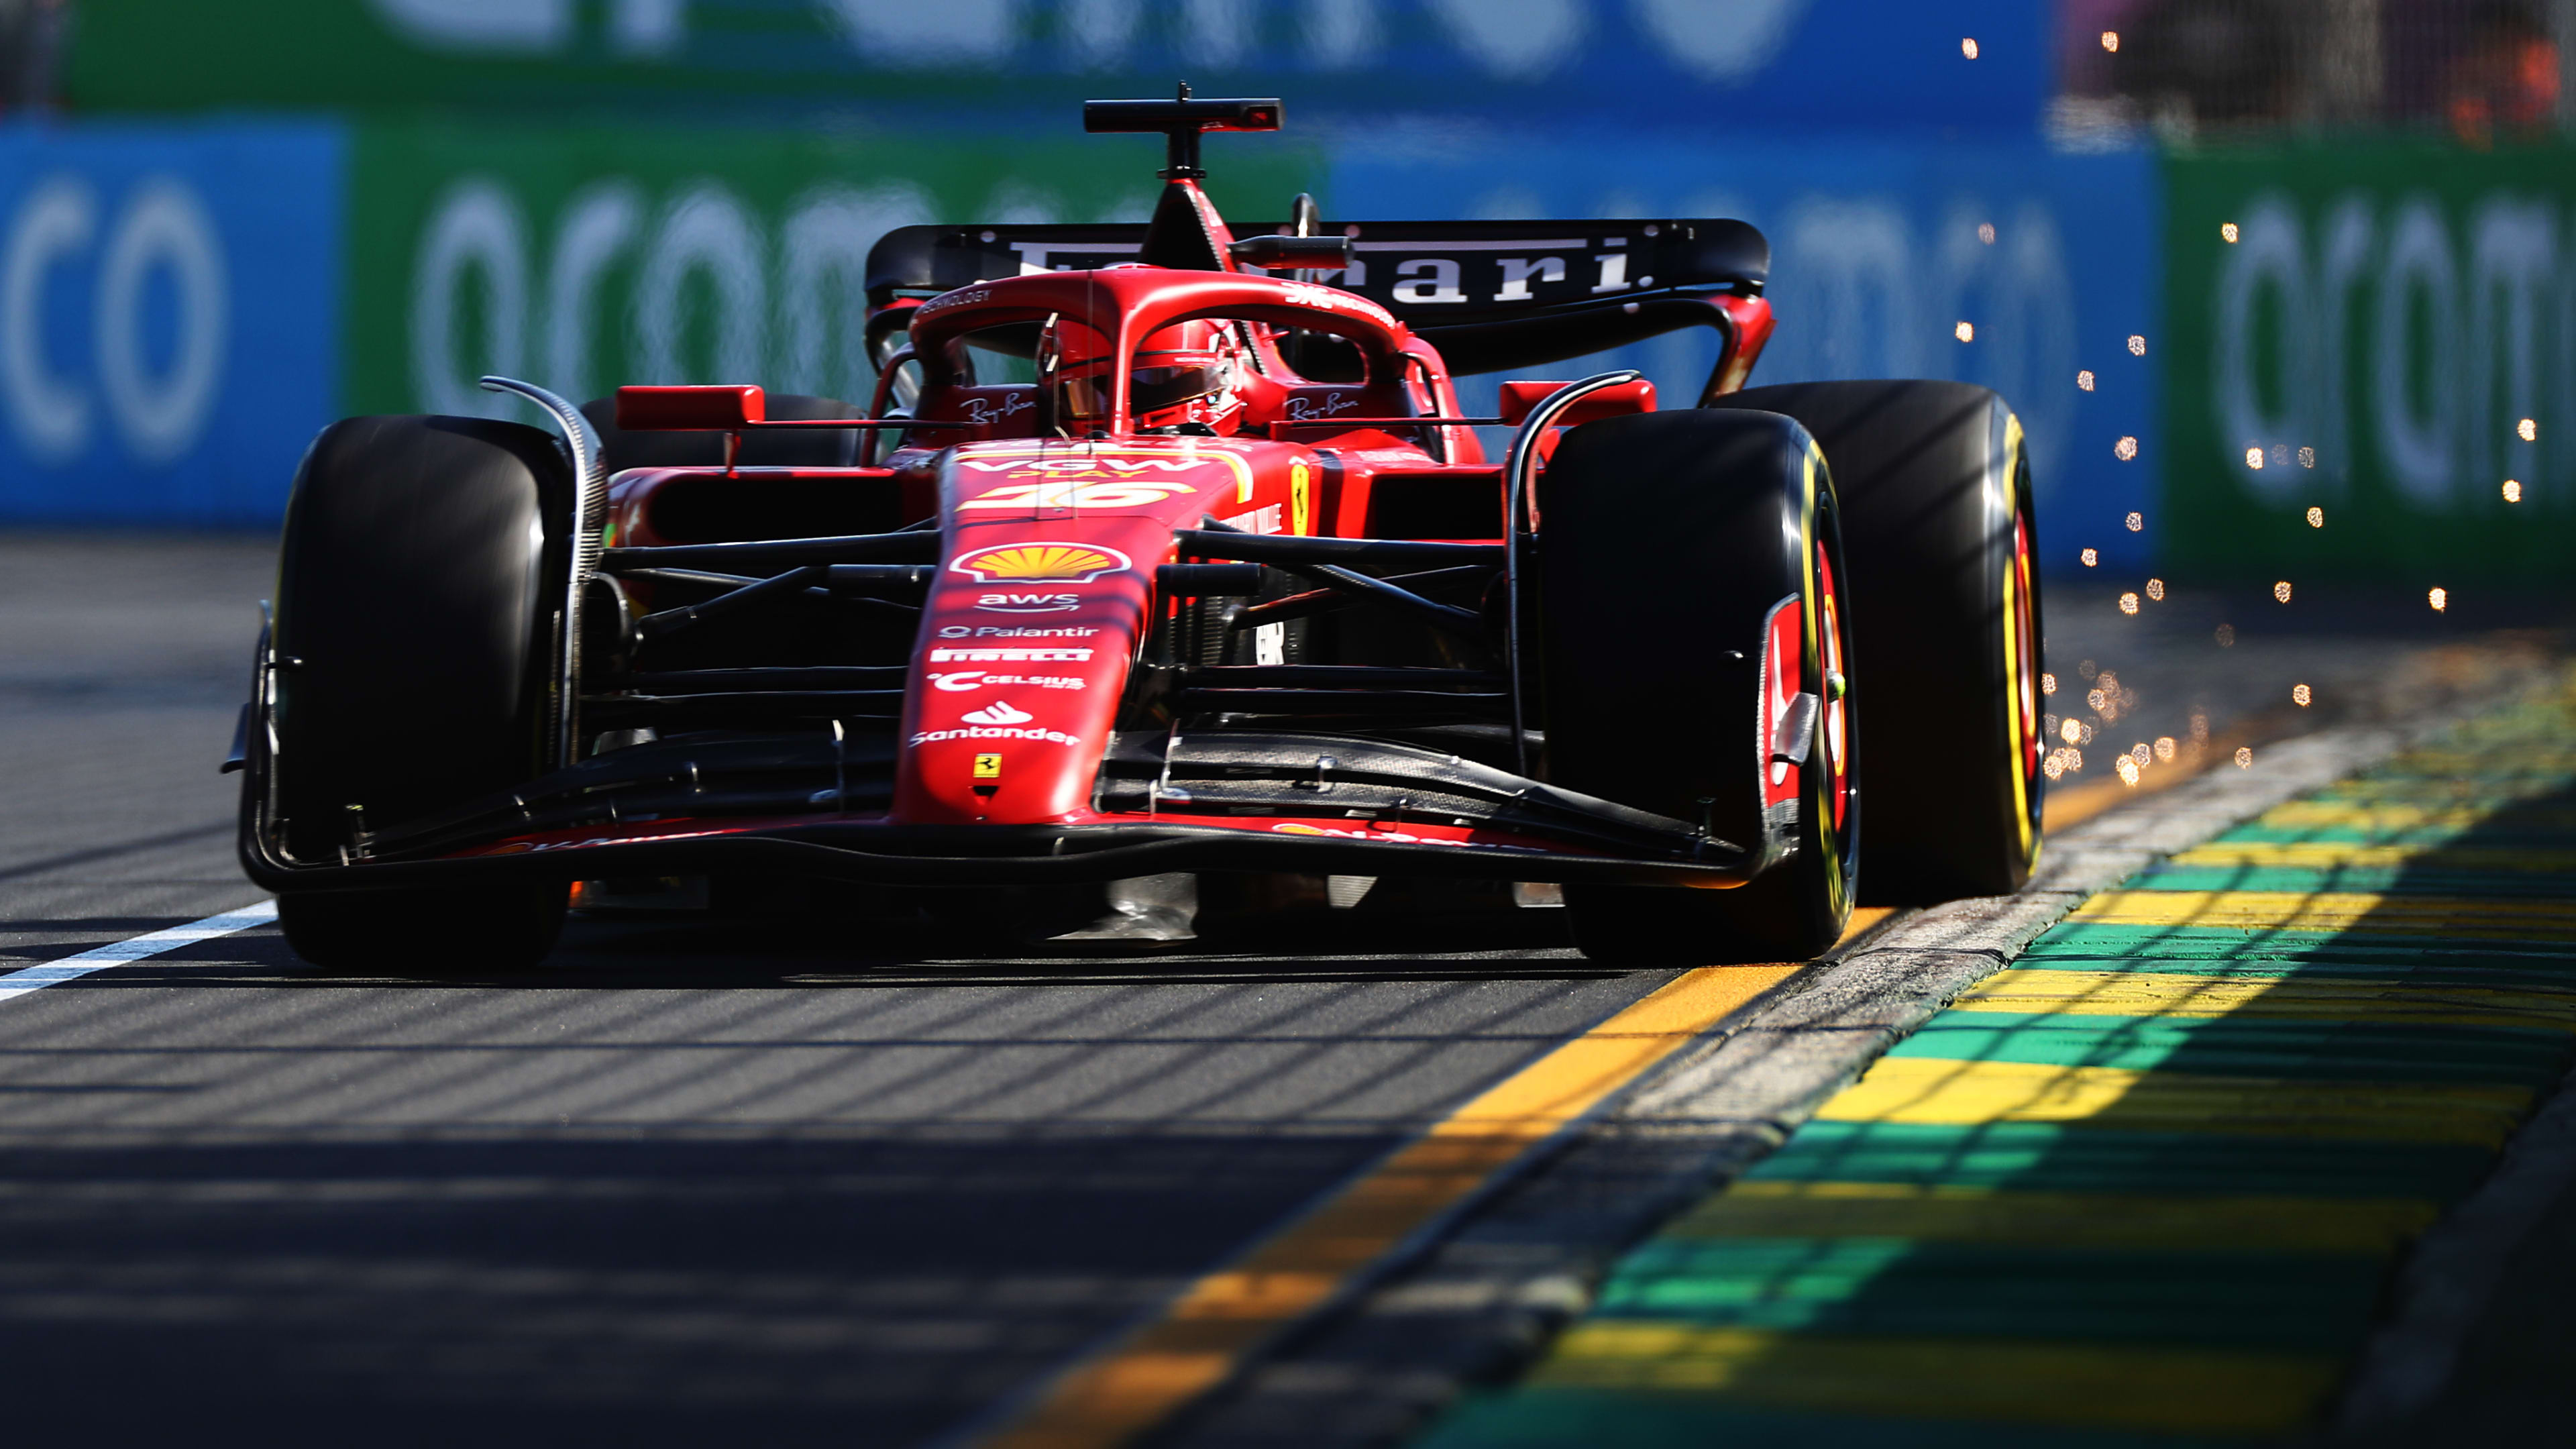 FP2: Leclerc sets the pace during second practice in Australia from Verstappen and Sainz